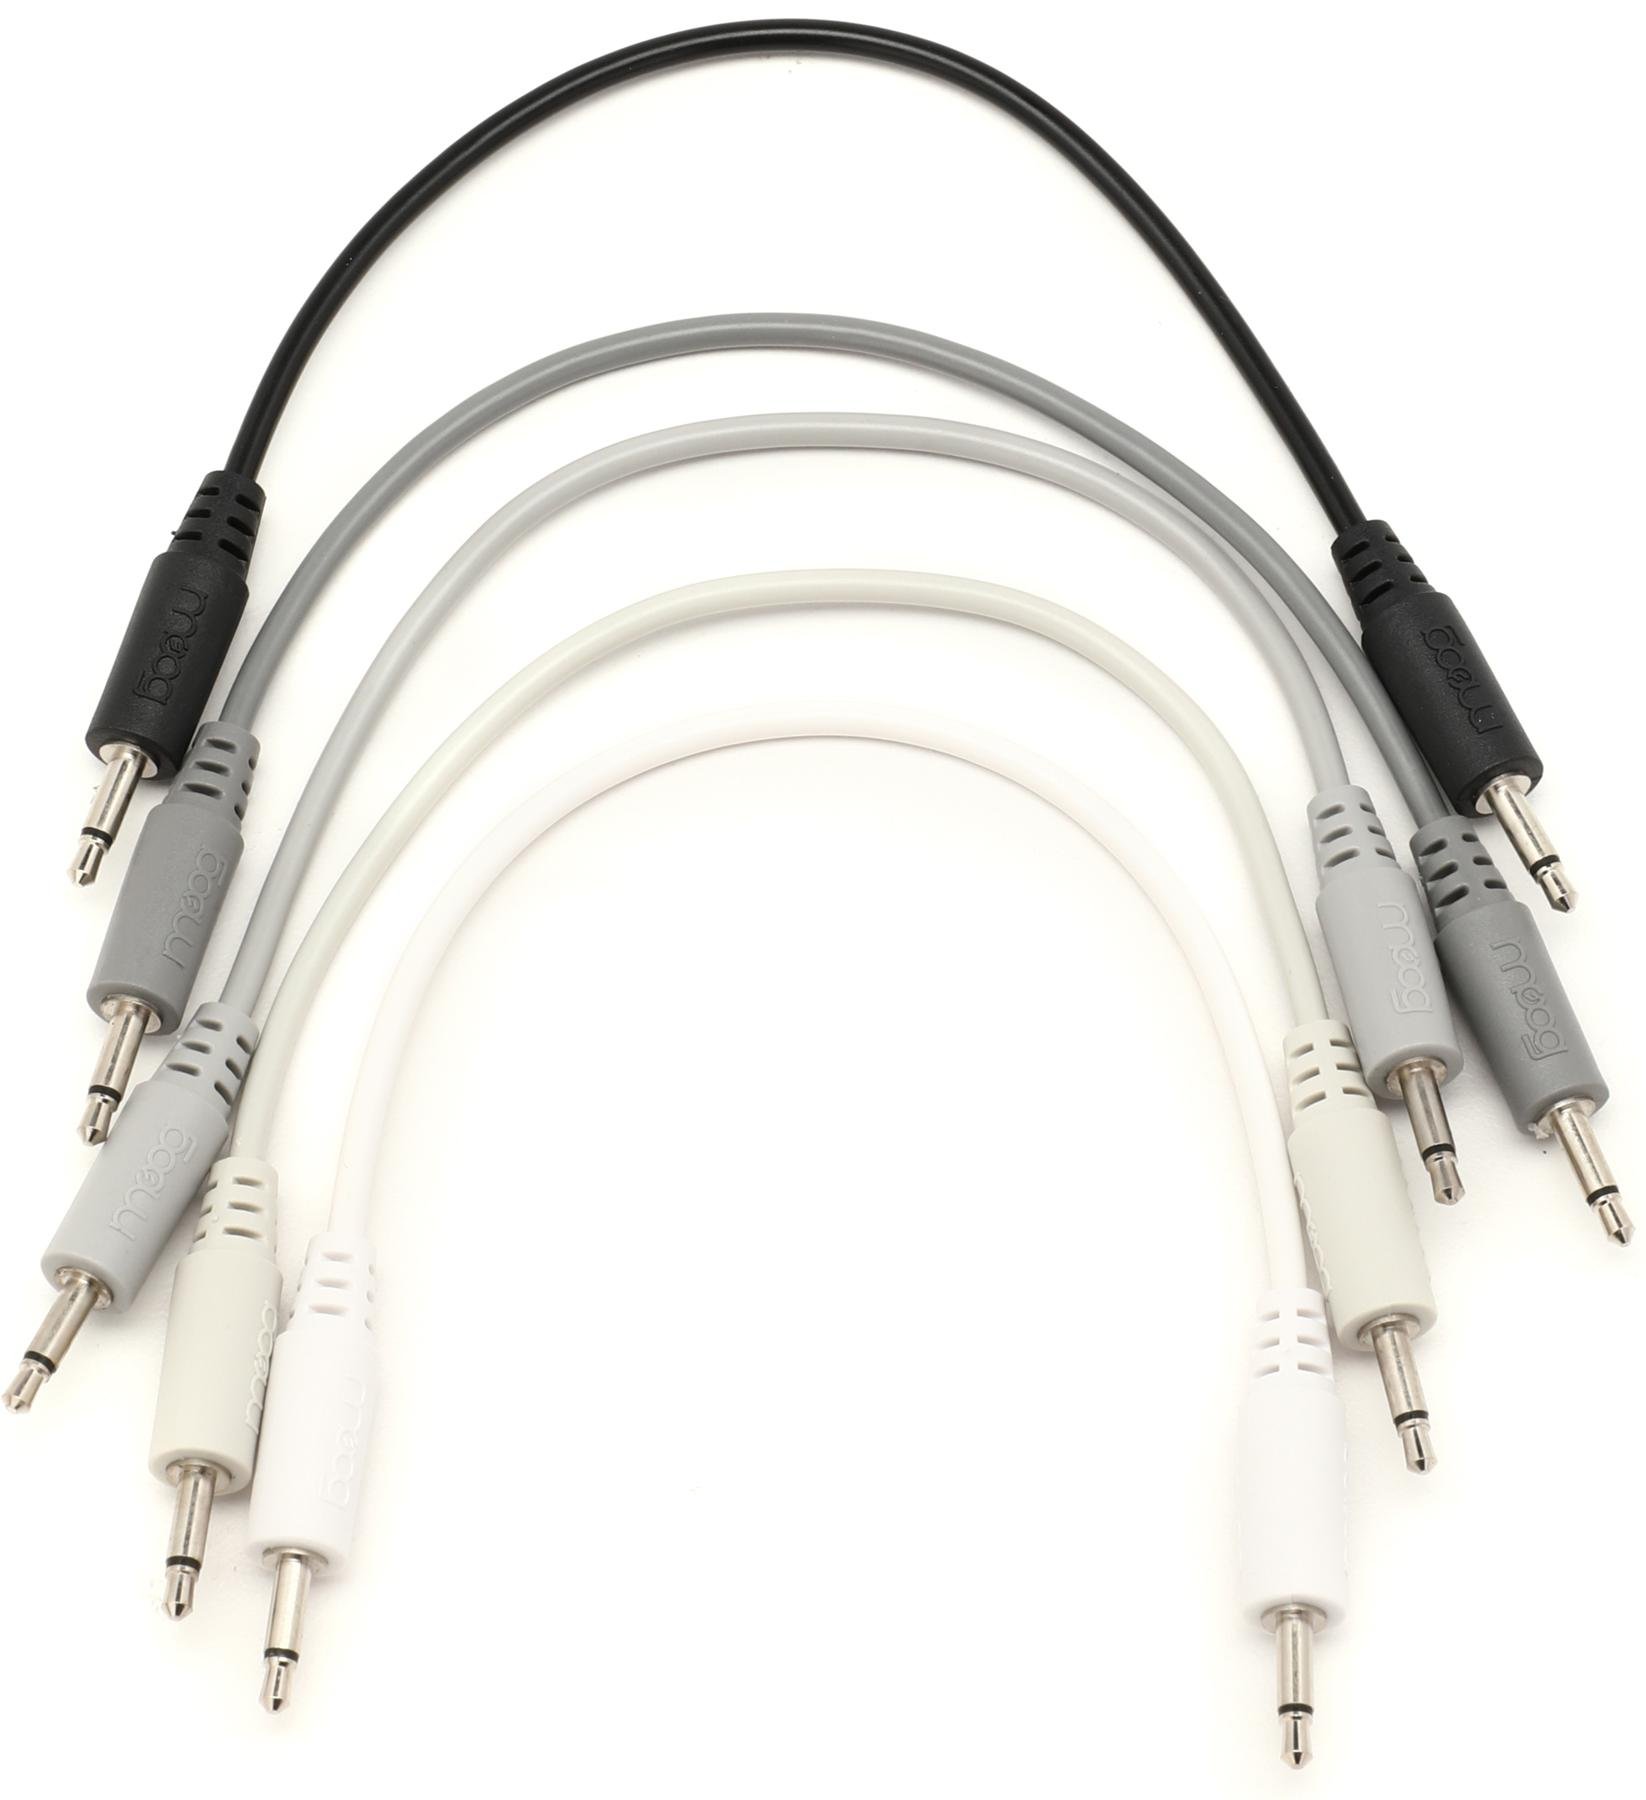 Set of 5 Braided 3.5mm to 3.5mm mono patch cables for use with Modular Synthesizers 10 Colours / 6 Lengths Eurorack Patch Cables